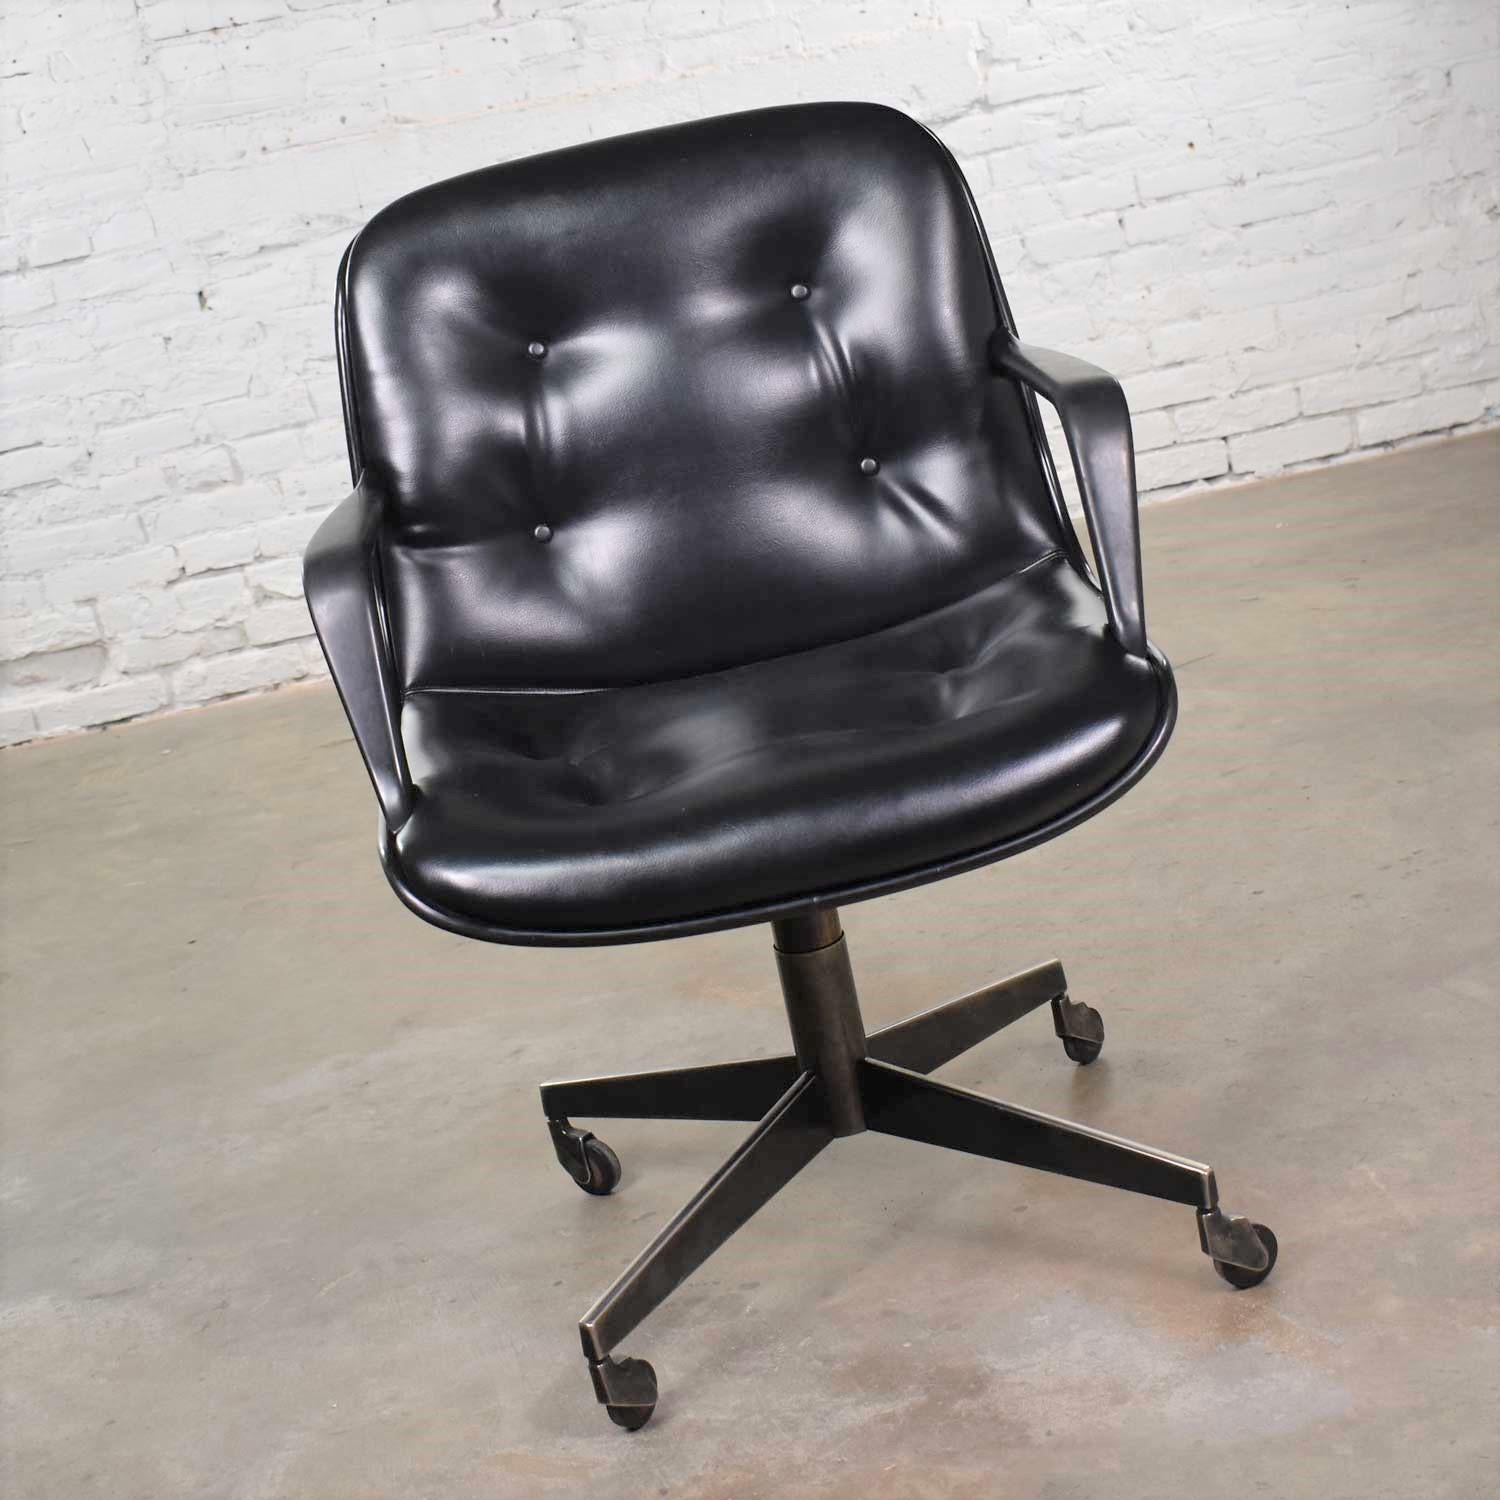 Handsome black vinyl faux leather modern Steelcase 451 office chair on casters in the style of the Charles Pollock tilt, swivel, and rolling office chair for Knoll. It is in wonderful vintage condition with no outstanding flaws only normal wear for